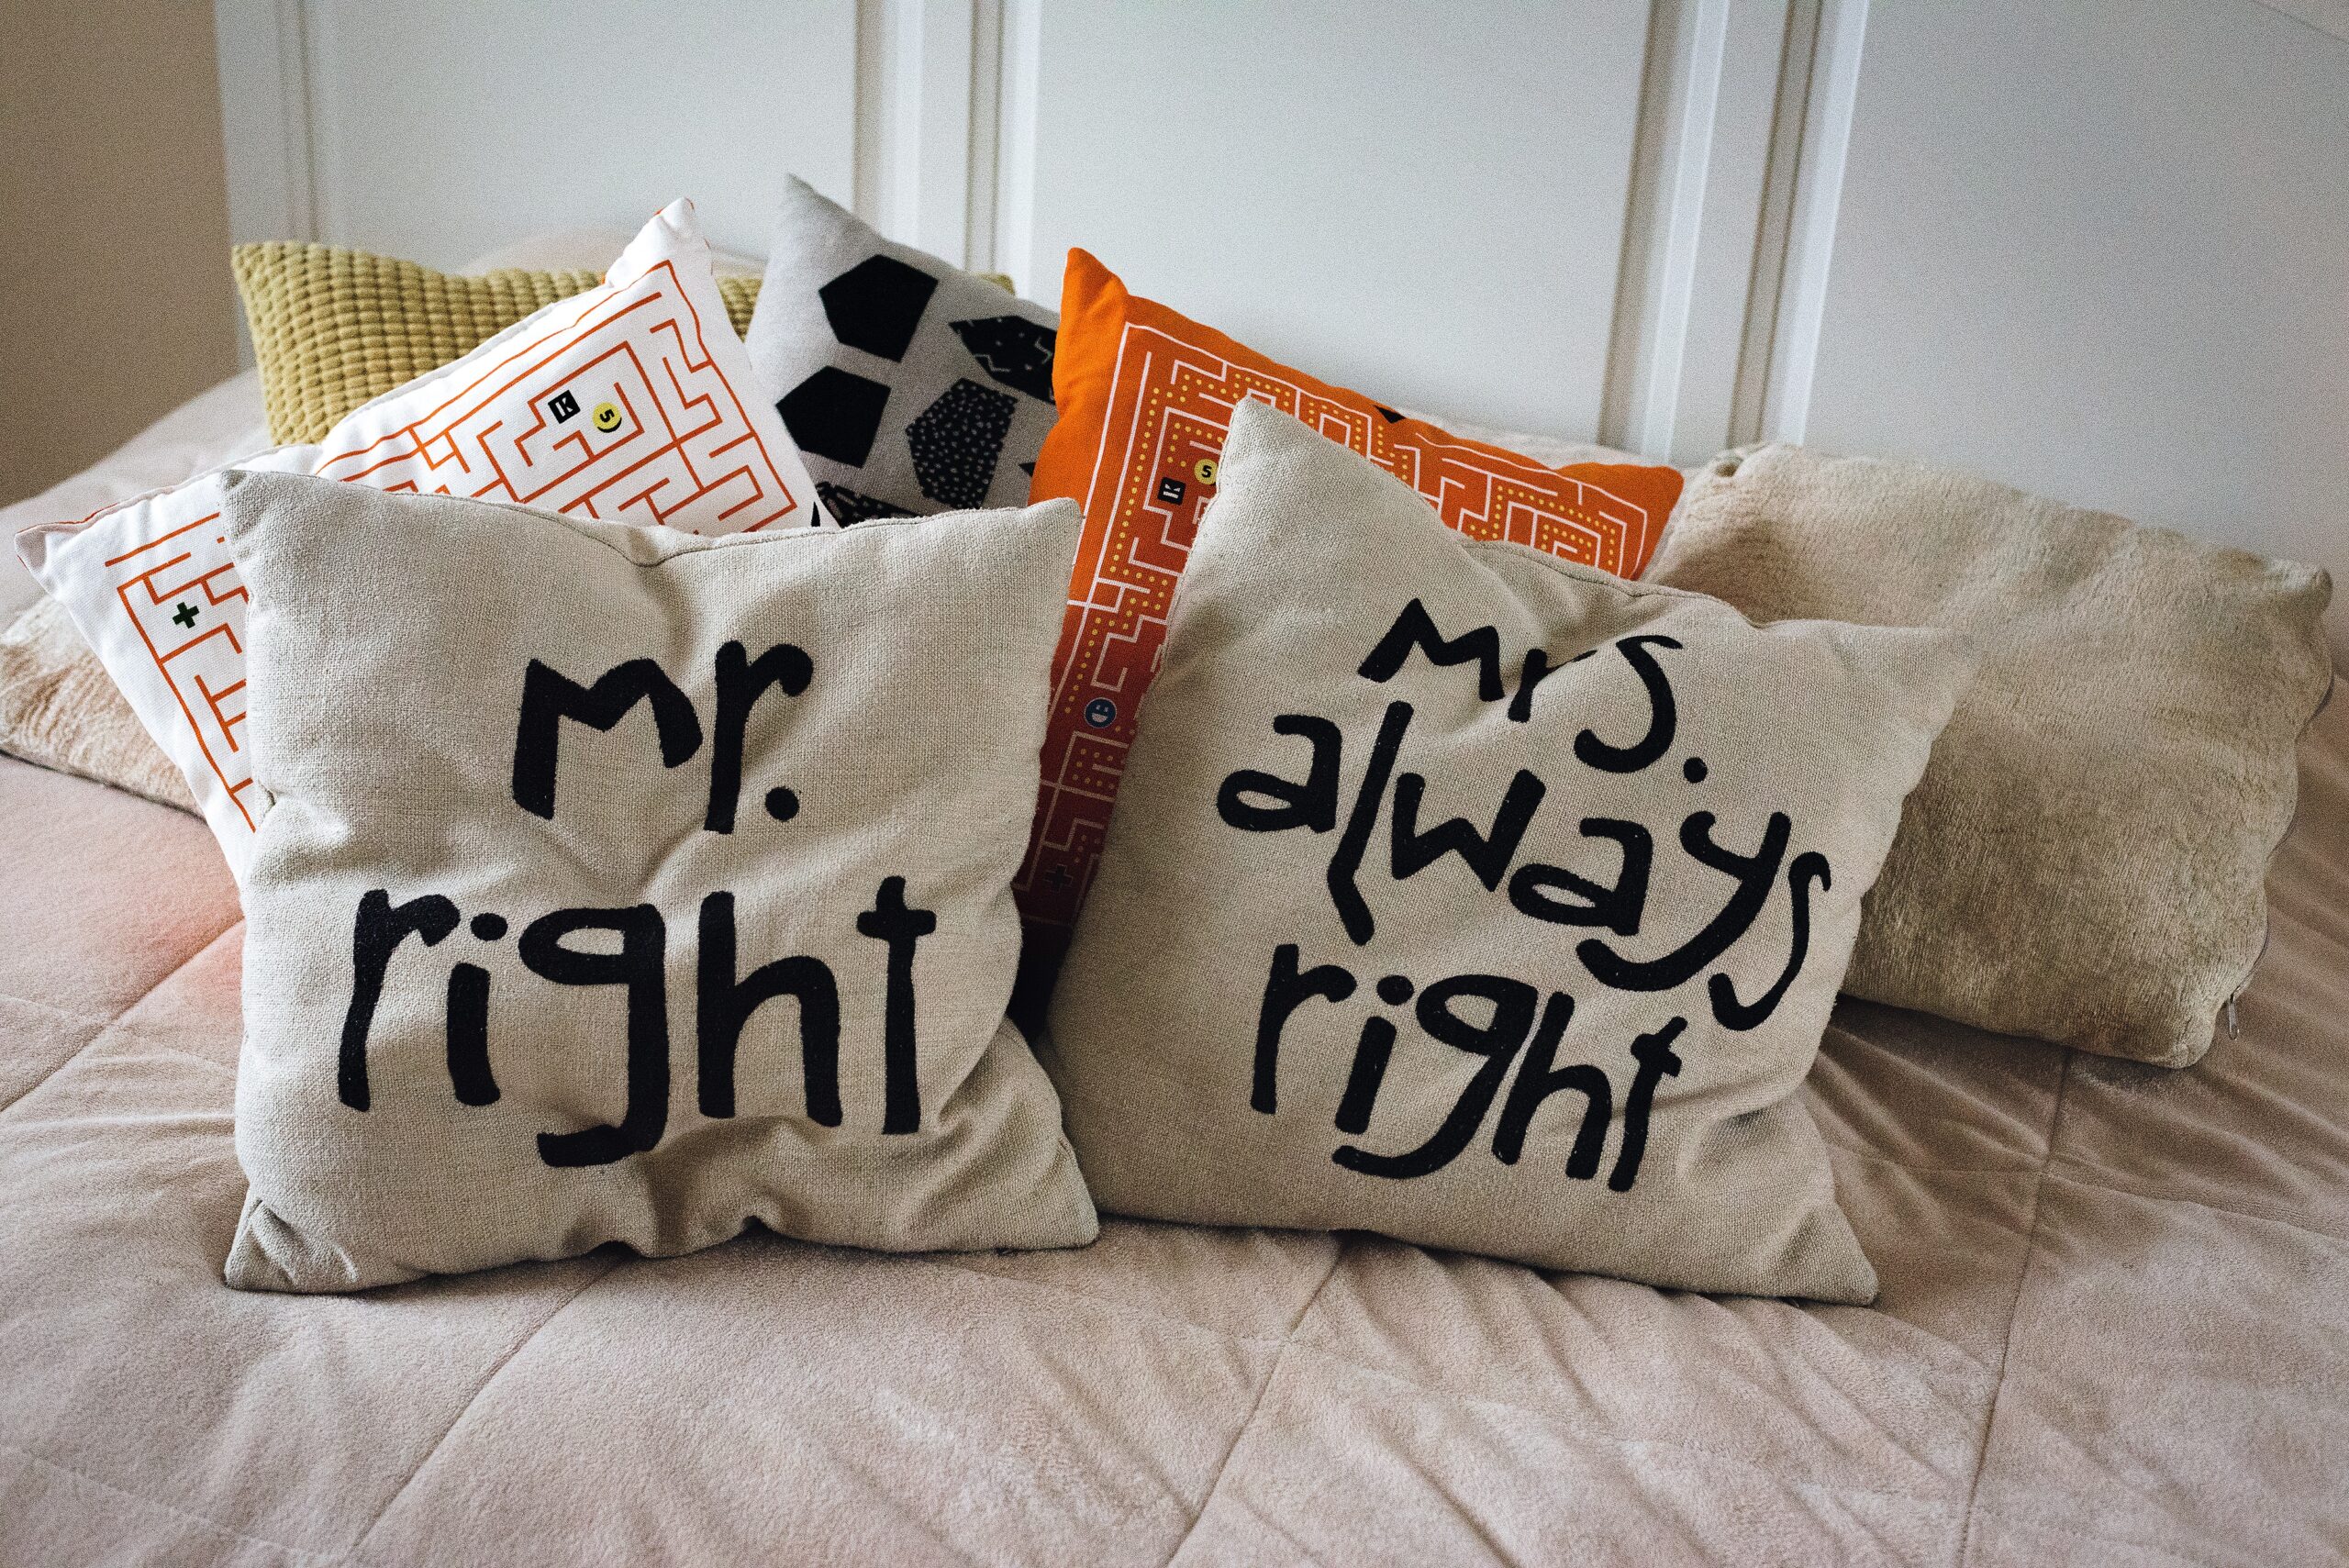 Throw pillows with wording on them